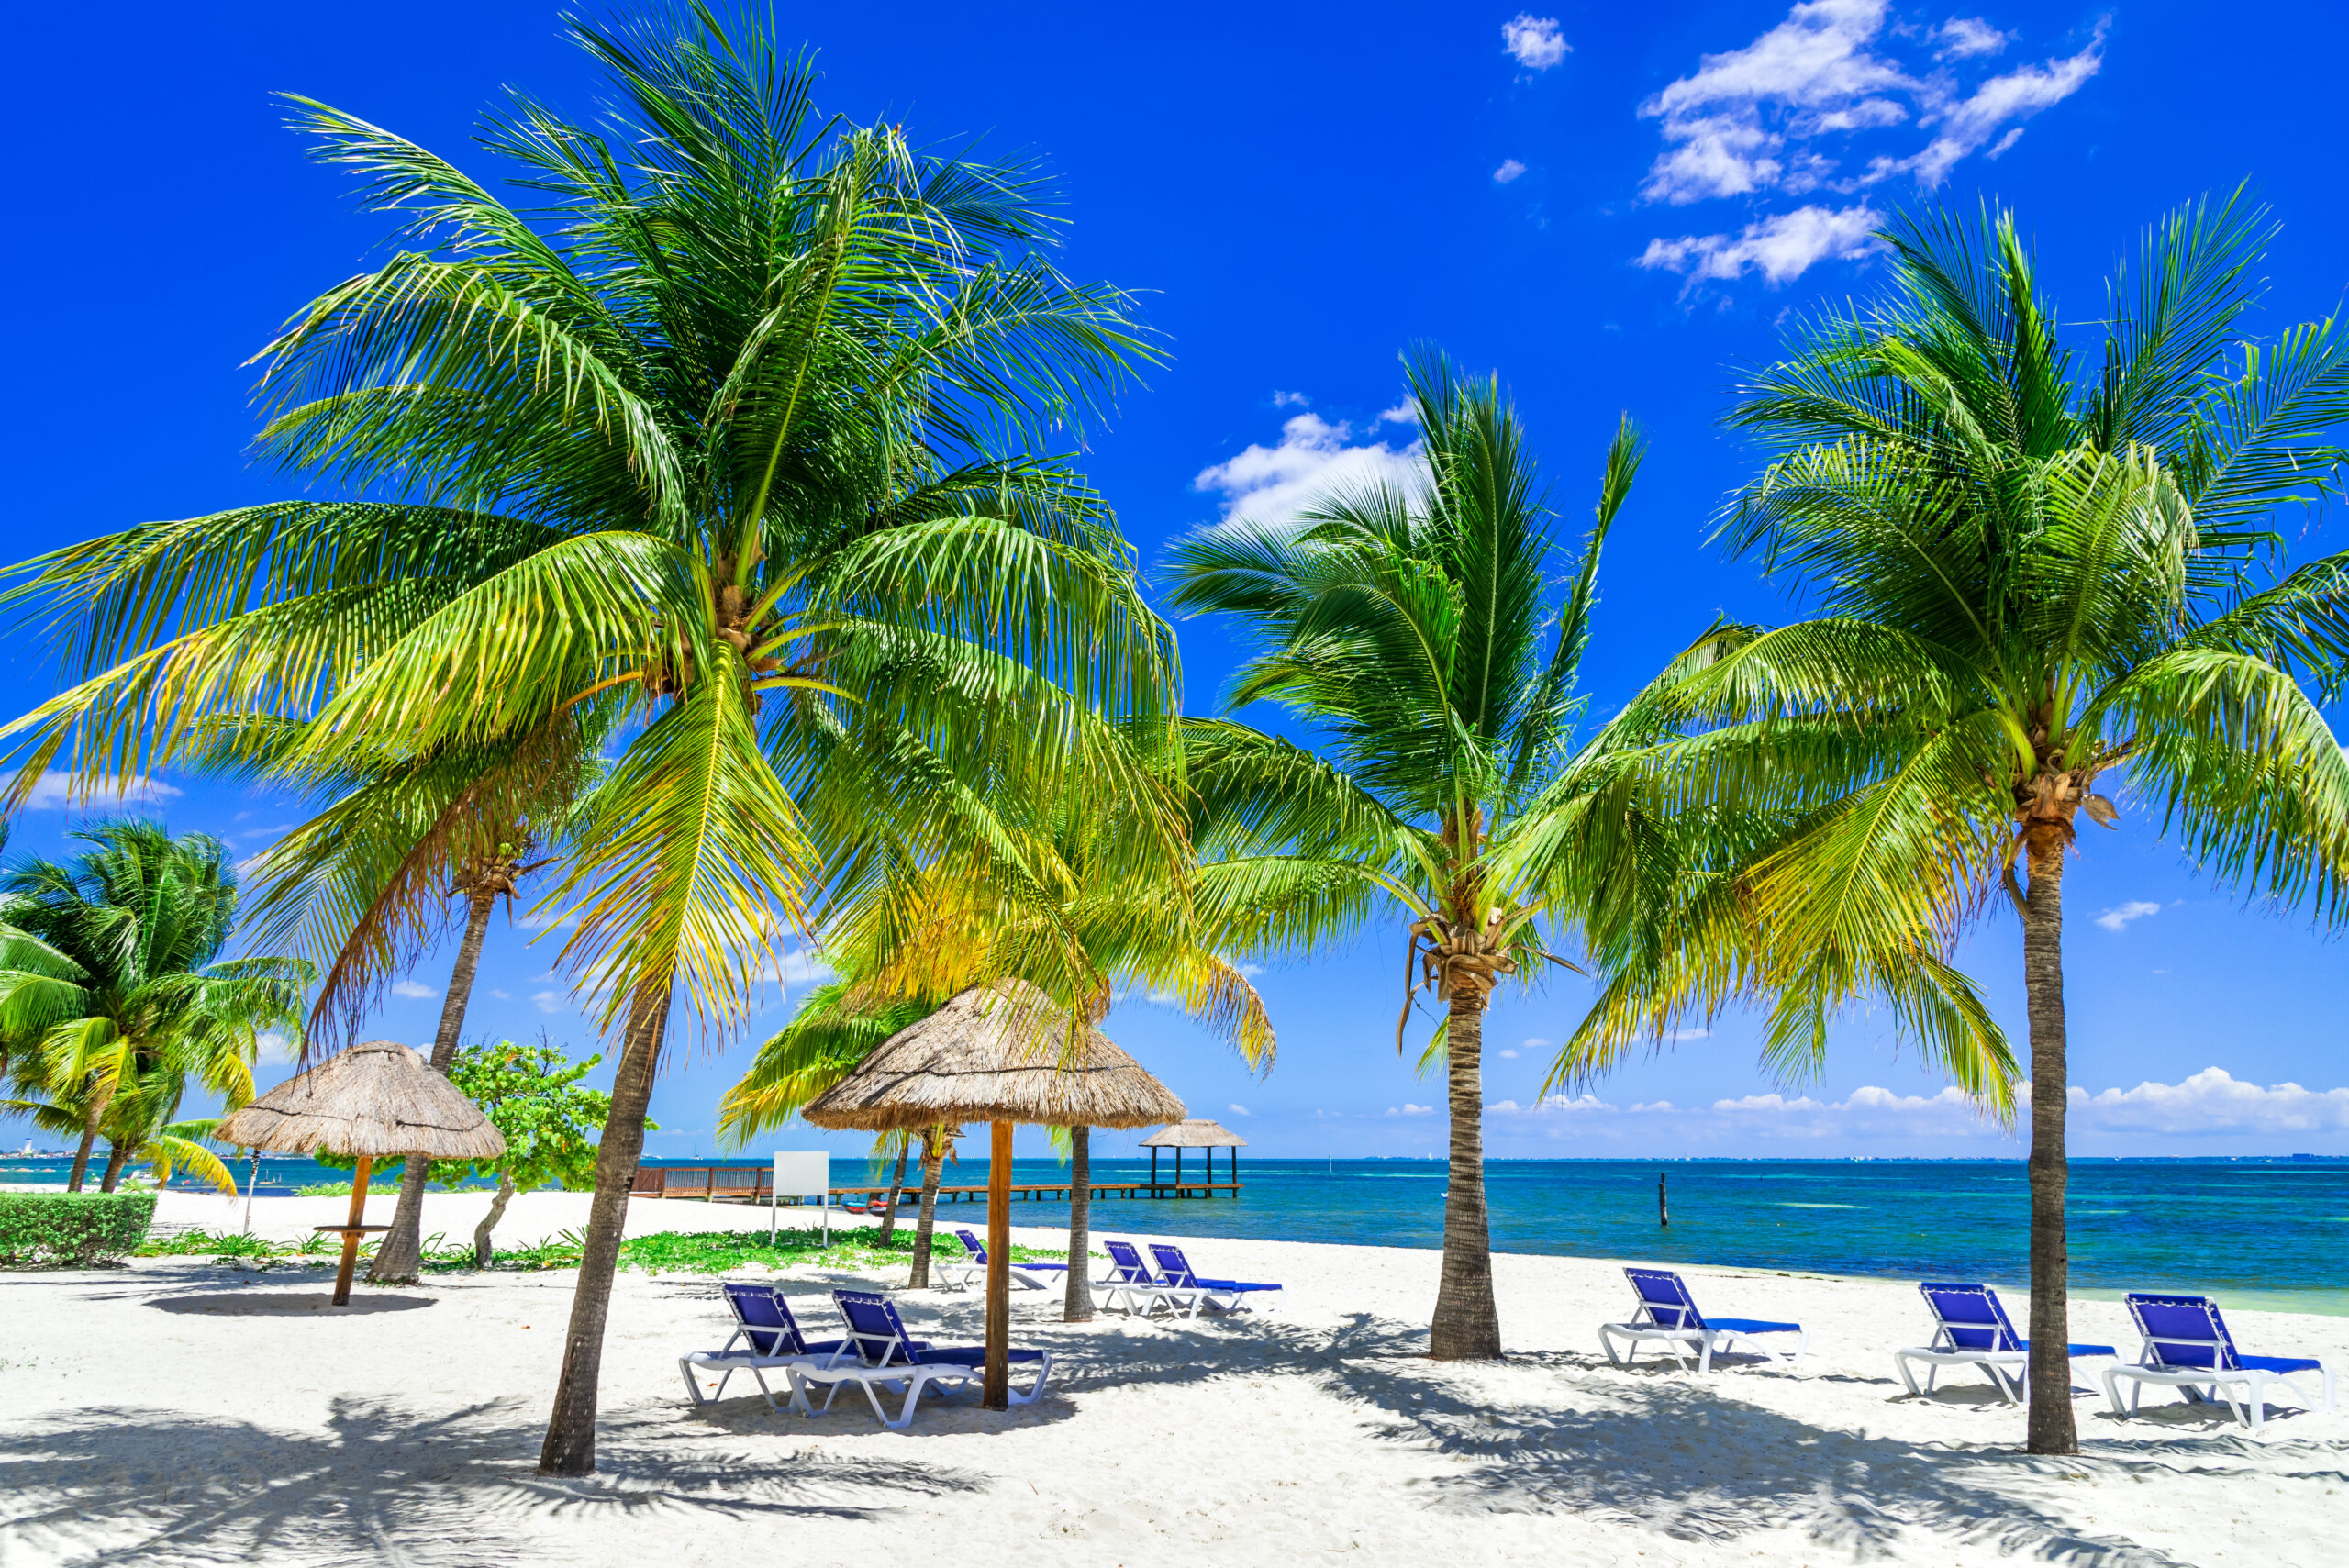 Tropical landscape with coconut palm on caribbean beach, Cancun, Yucatan Peninsula in Mexico.